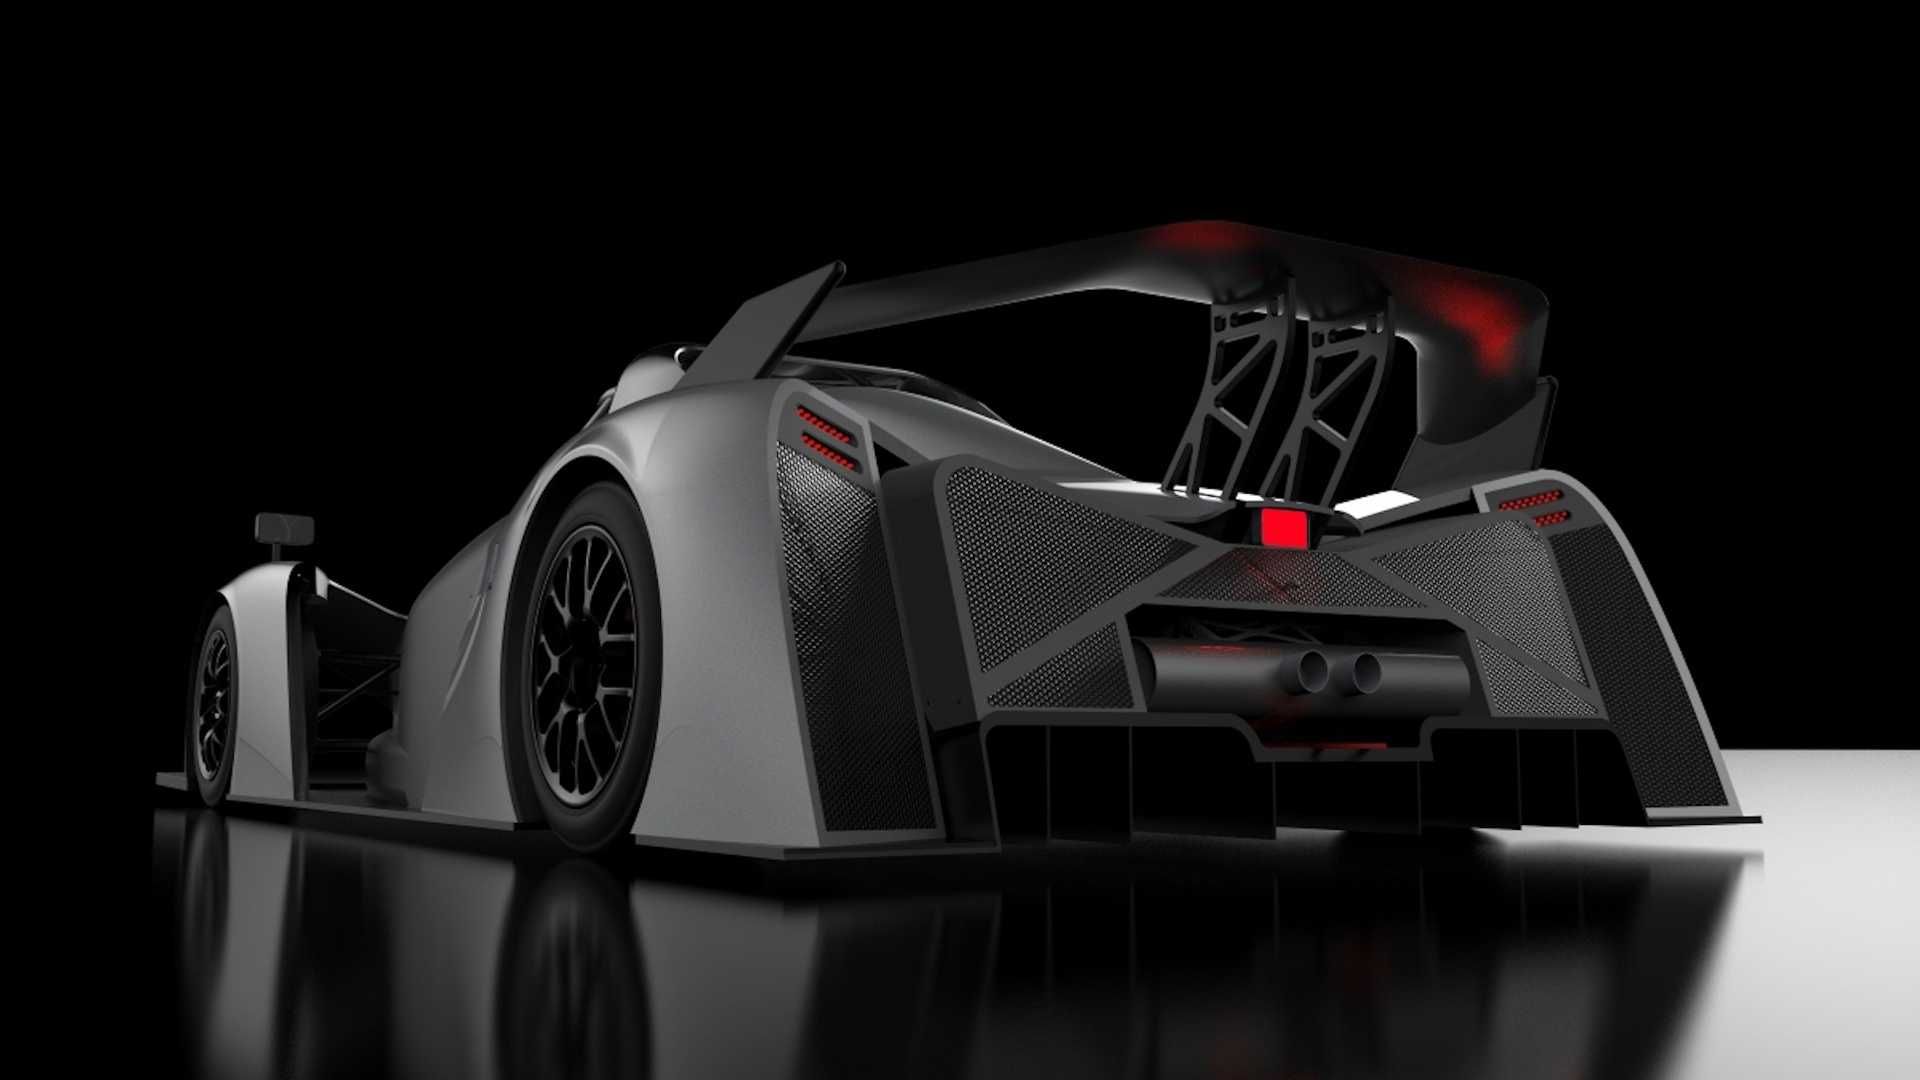 Check Out The Revolution: The Newest Ford V6-Powered Race Car